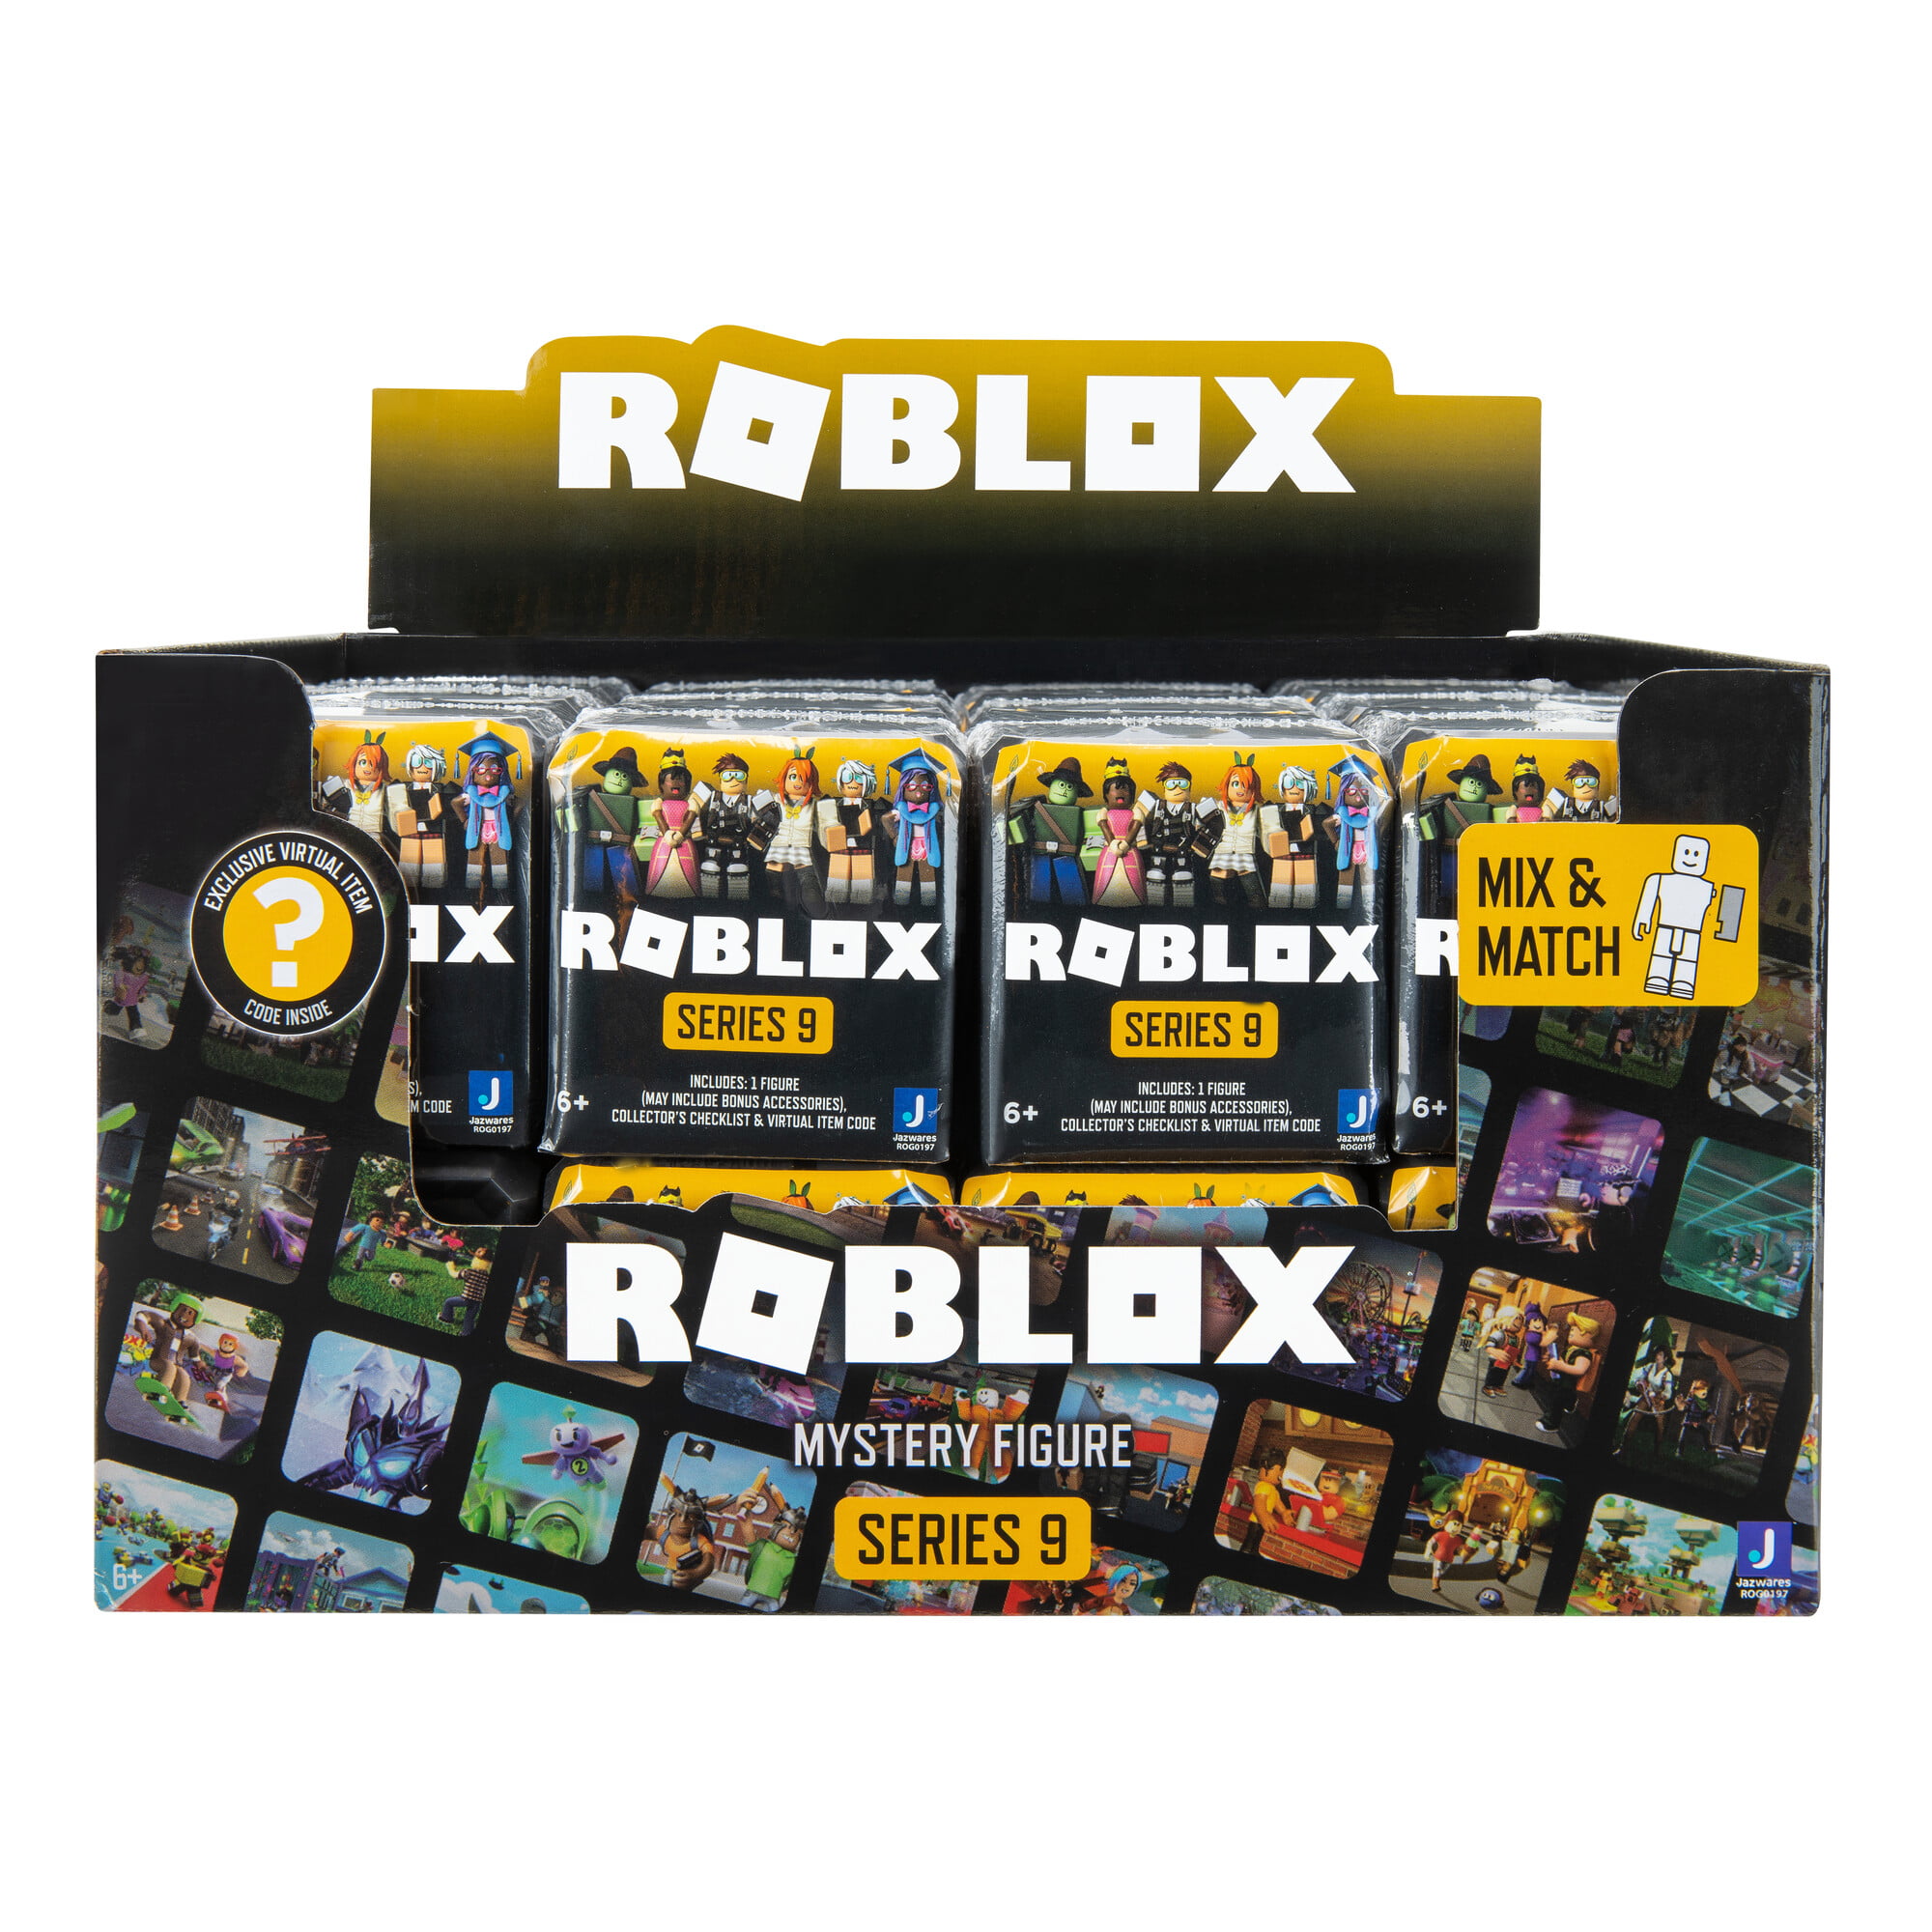 ROBLOX CELEBRITY Mystery Figures Wave 7 Assortment Factory Sealed Box IN STOCK 